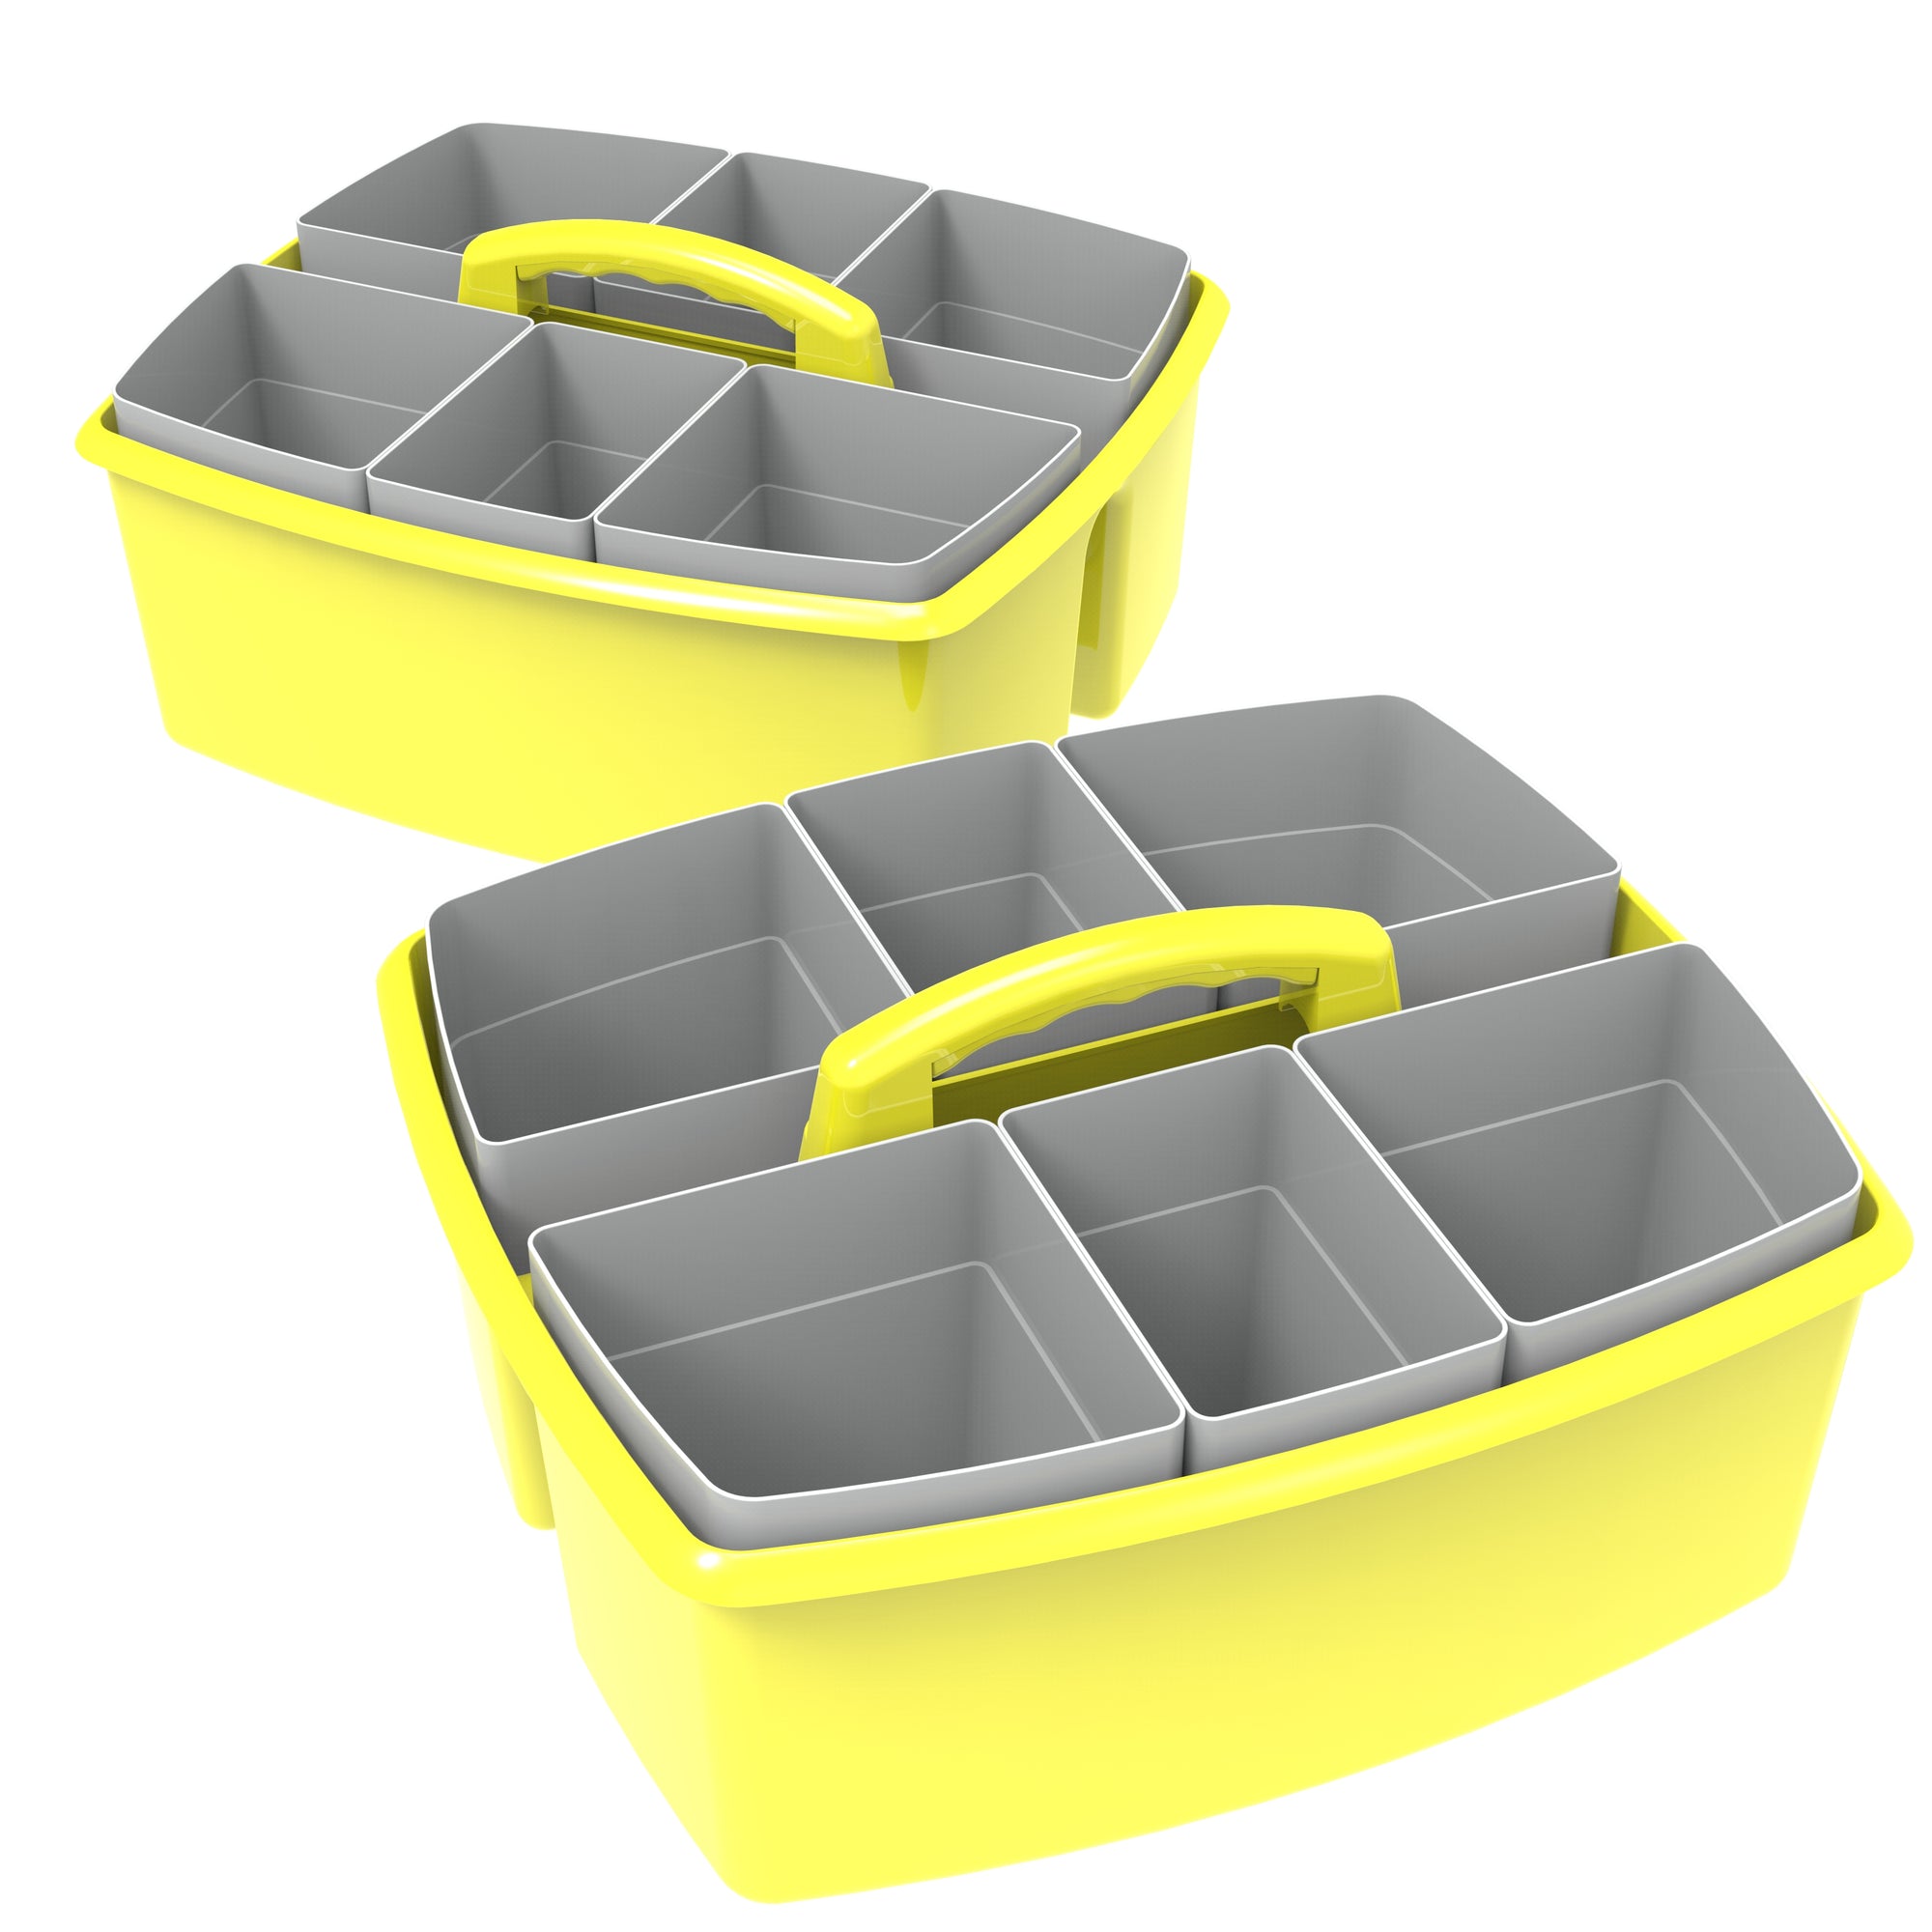 Storex Large Caddy with Sorting Cups, Yellow, 2-Pack